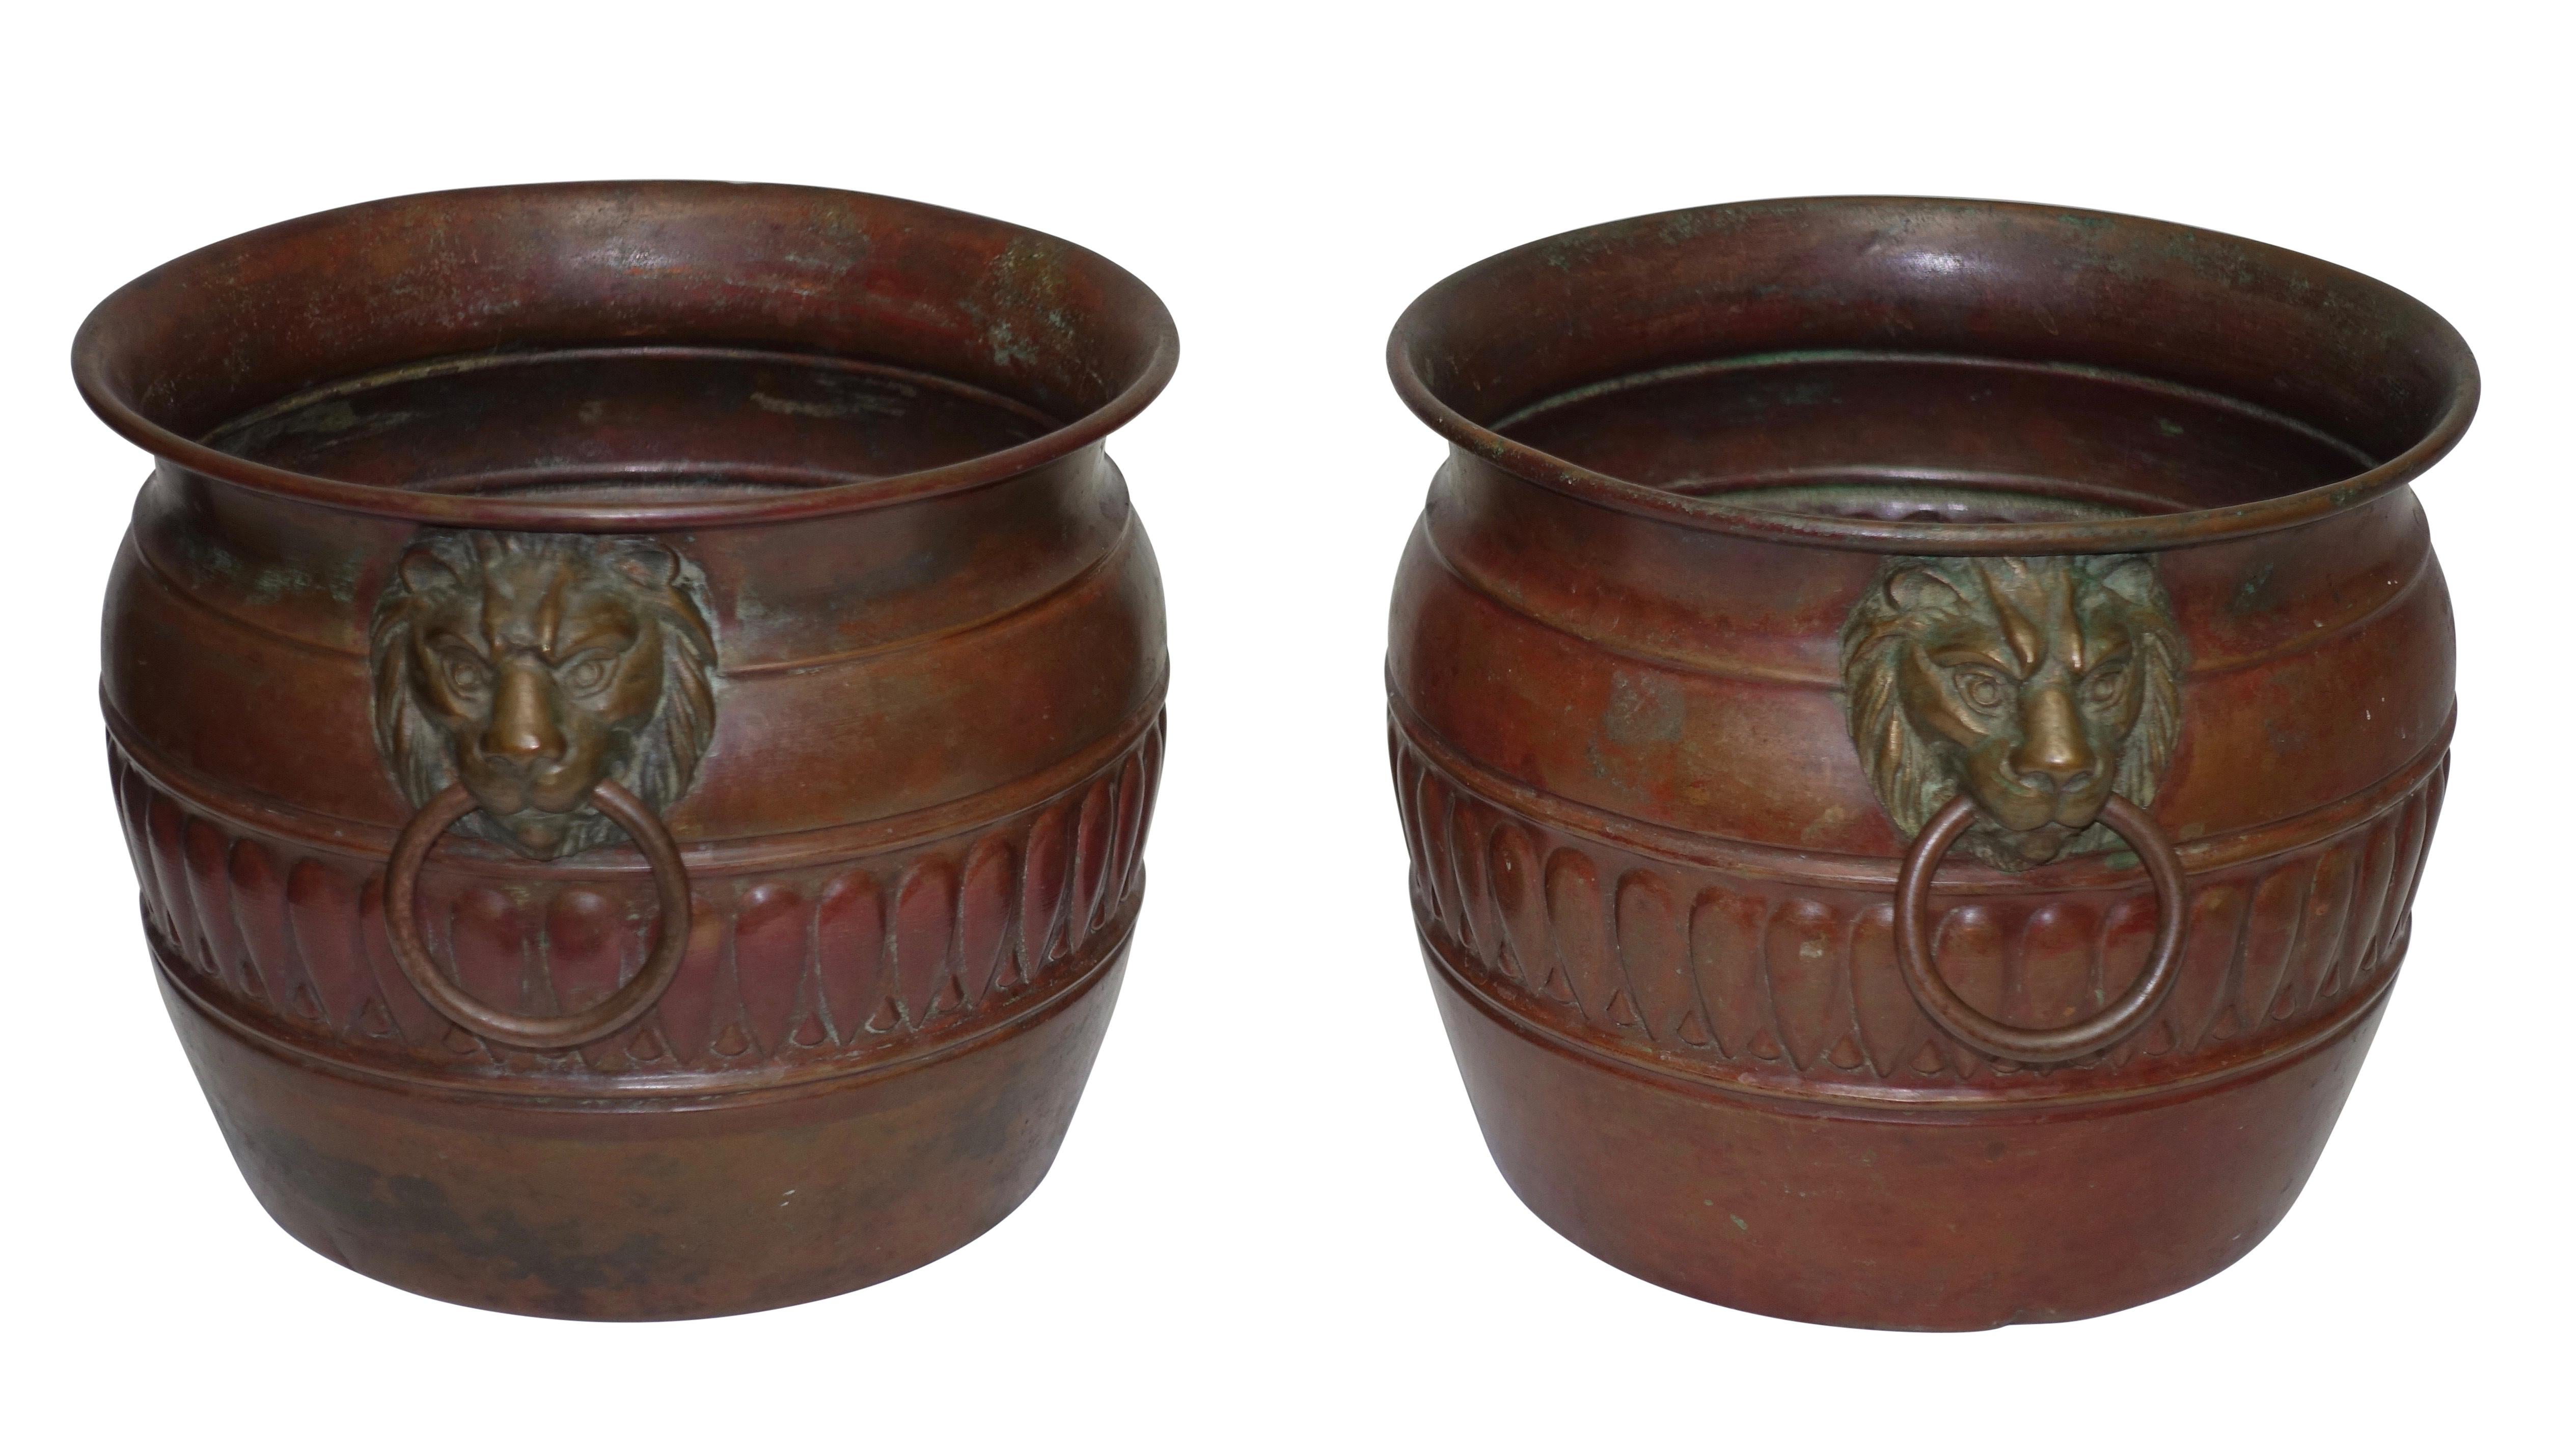 A unique pair of Arts & Crafts style copper cachepots with lion head masks and copper ring handles, pots have a red patinated finish. Both have impressed marks on the underside but are not clear enough to be distinguishable. Italy, mid-20th century.